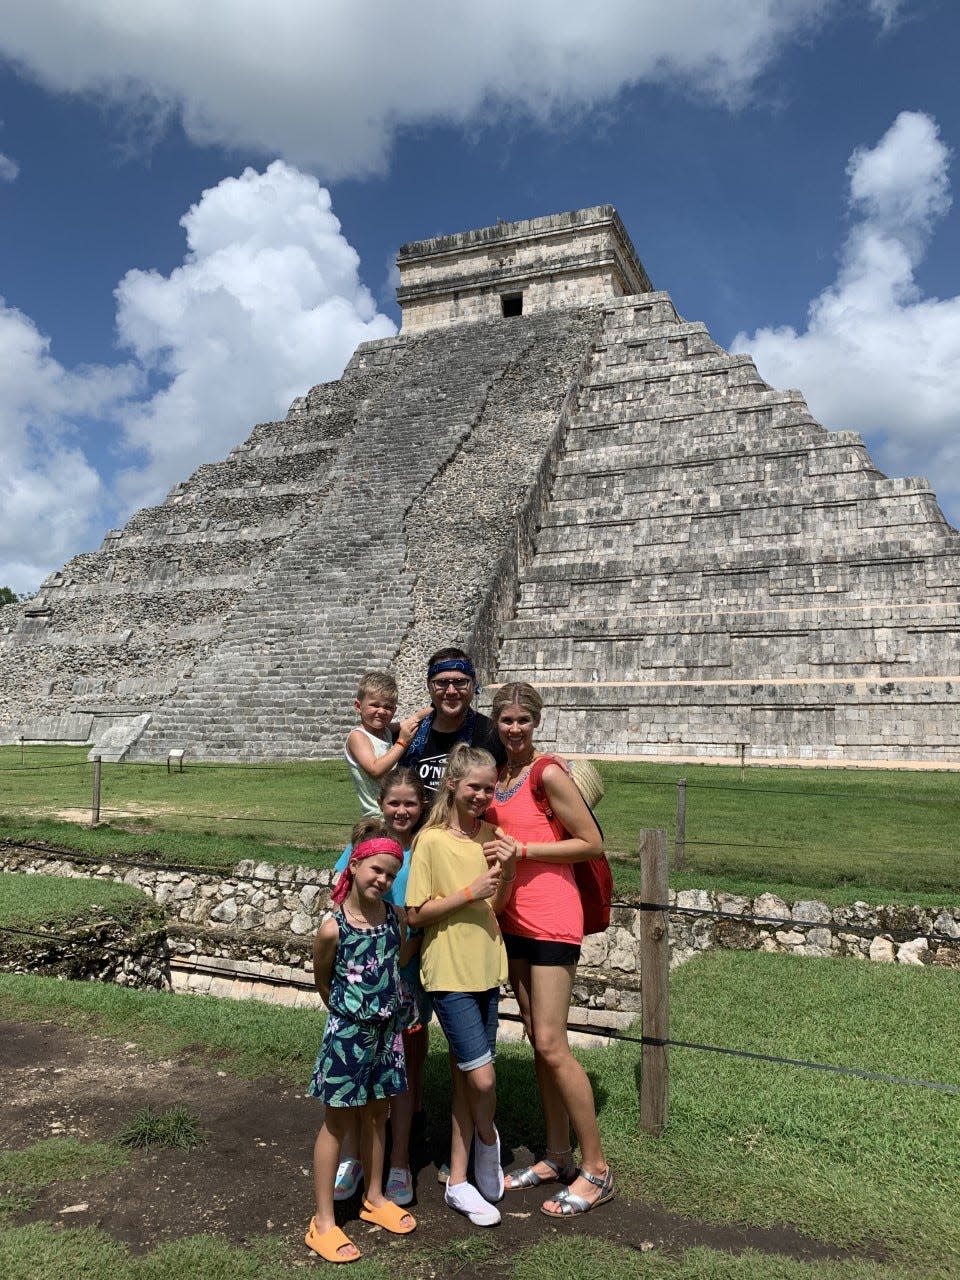 A family of six posing in front of the El Castillio pyramid at Chichén Itzá in Mexico.